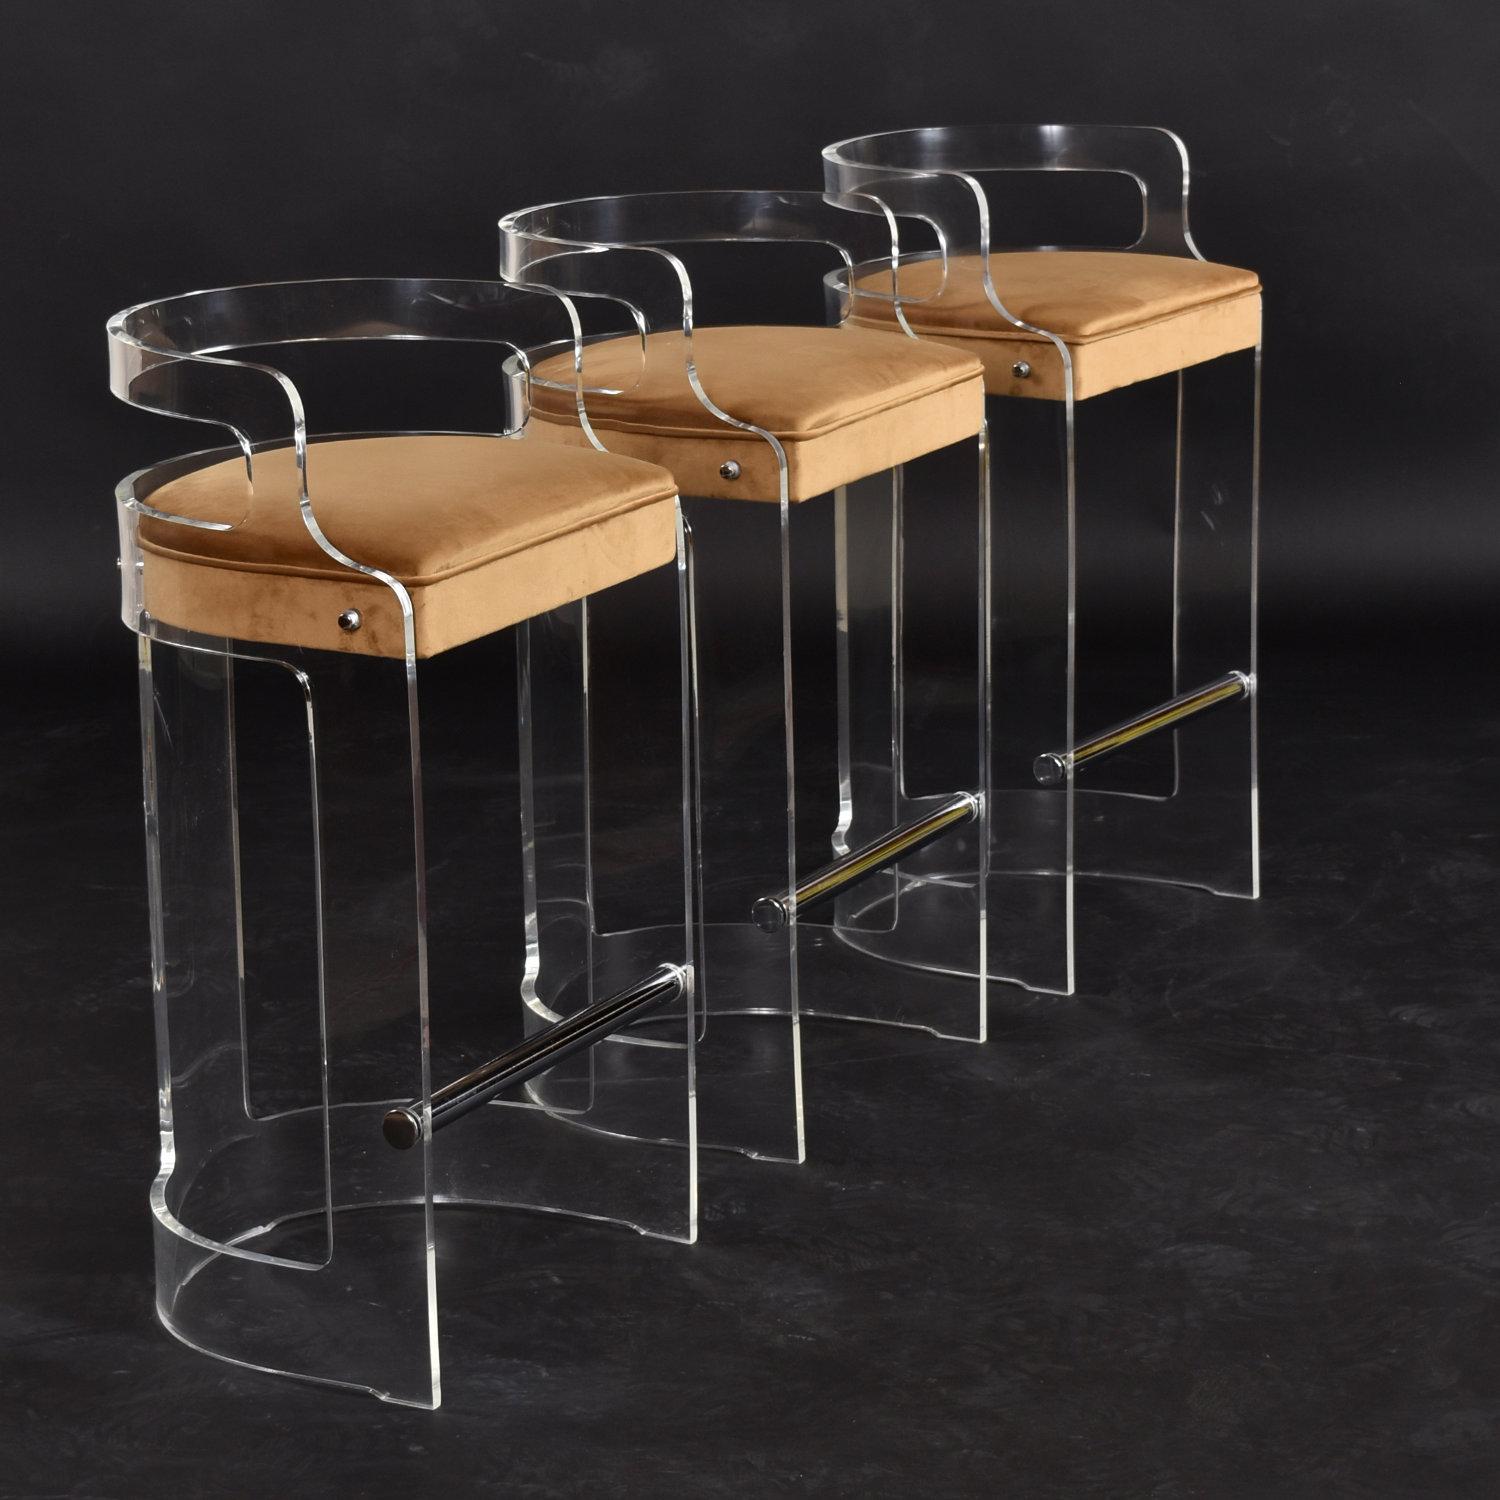 Set of three vintage 1970s Post Modern clear acrylic bar stools. The chic Lucite bar stools are restored with new luxurious gold velvet upholstery on the seats. Our restoration team has hand buffed the vintage acrylic. The thick Lucite frames have a